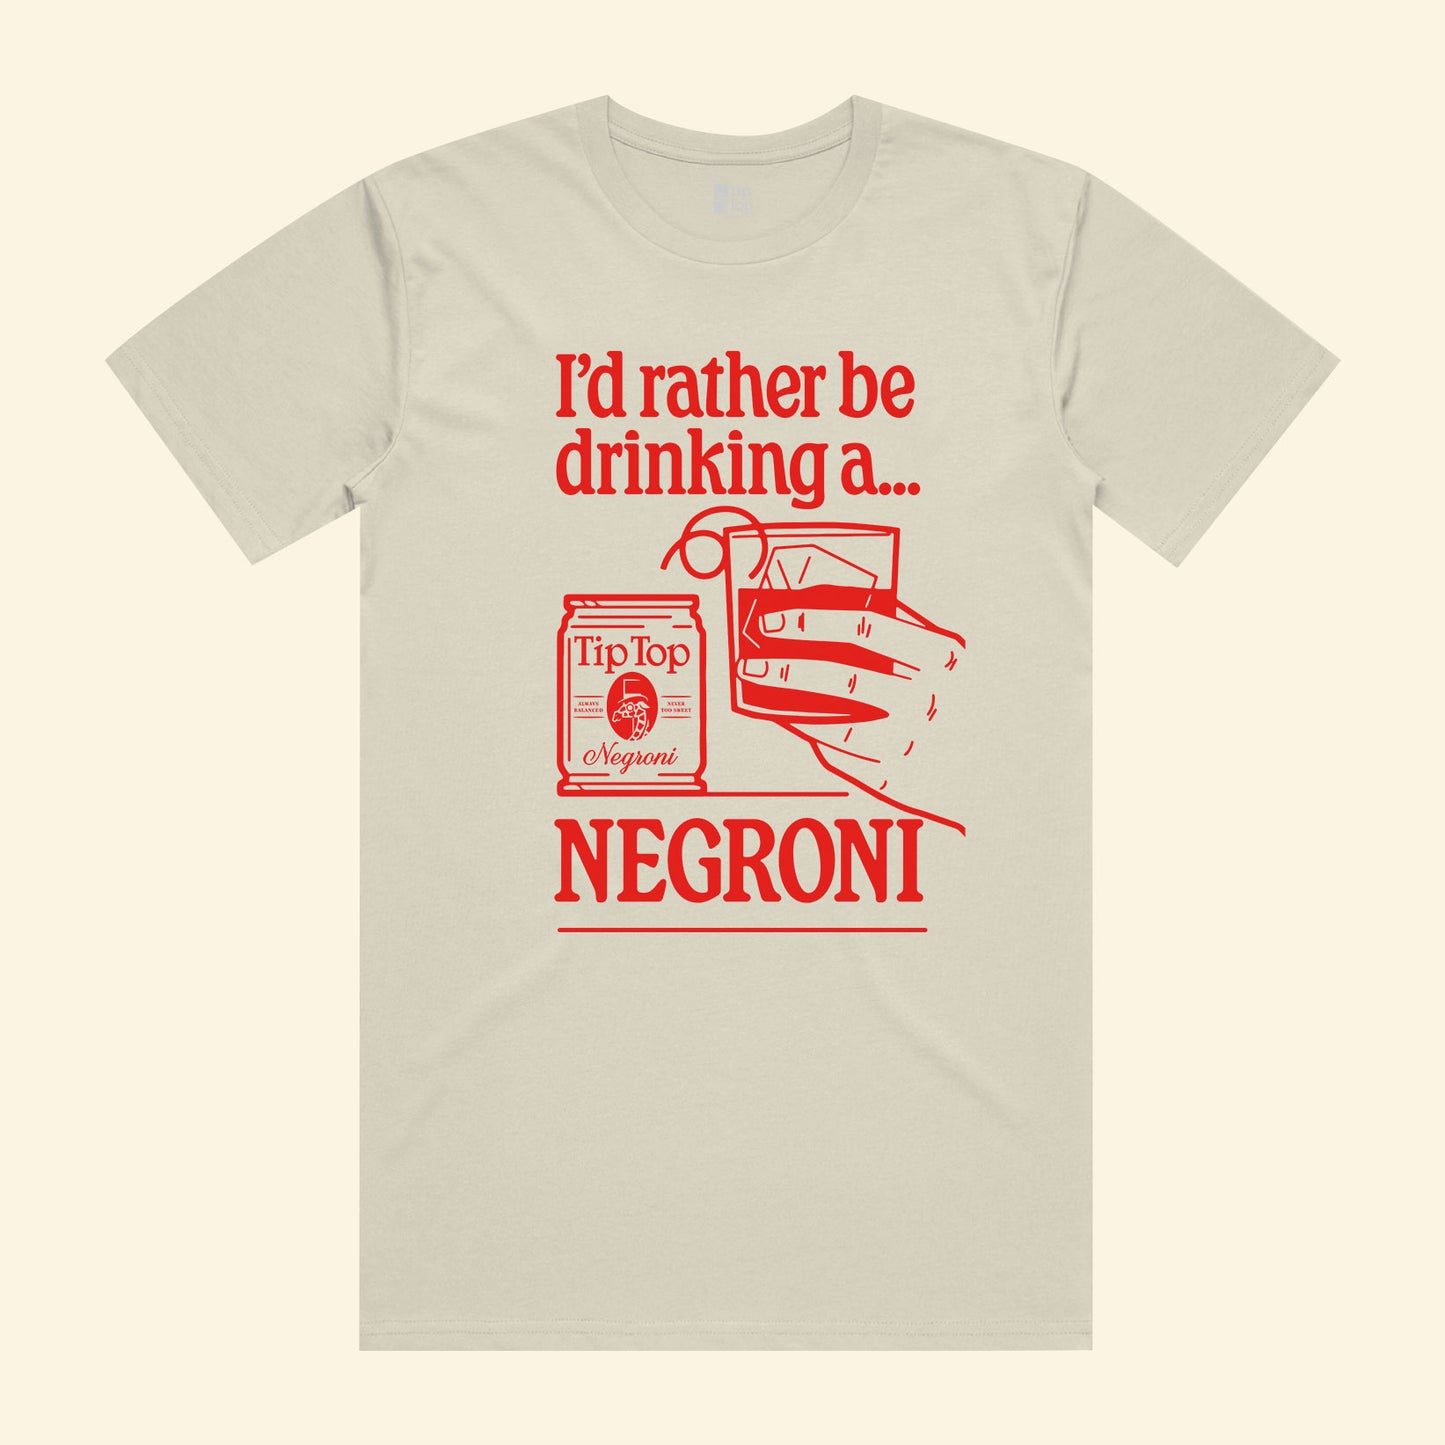 I'd Rather Be Drinking A...Negroni Tee